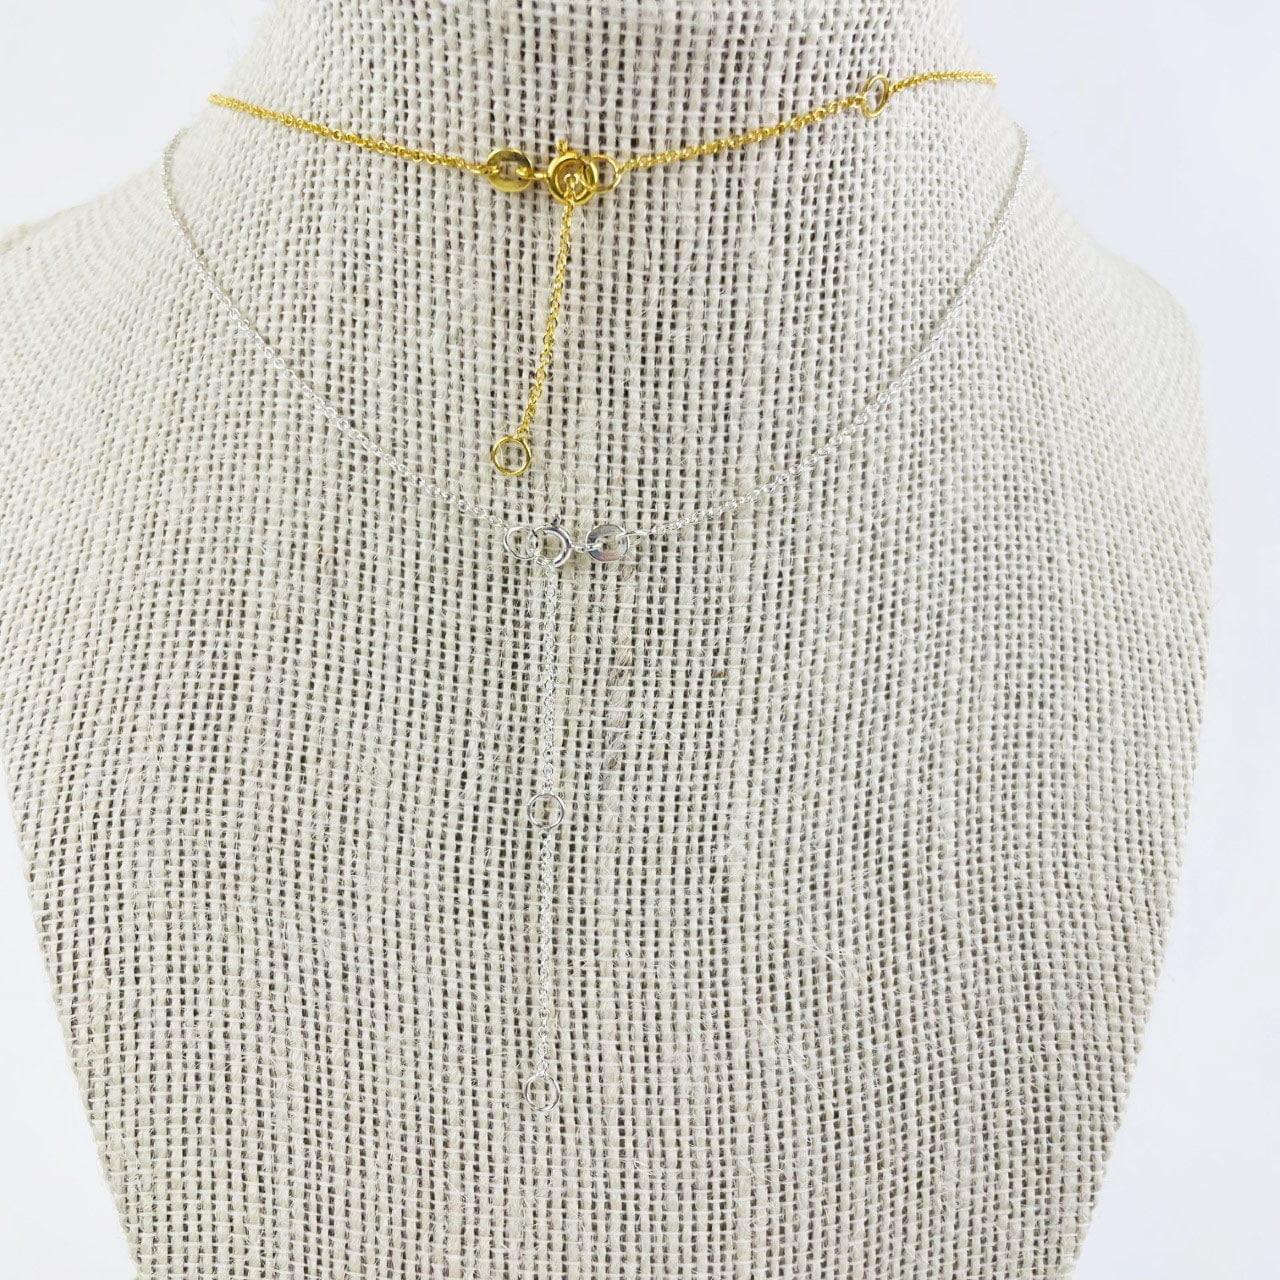 Back of necklaces showing clasp